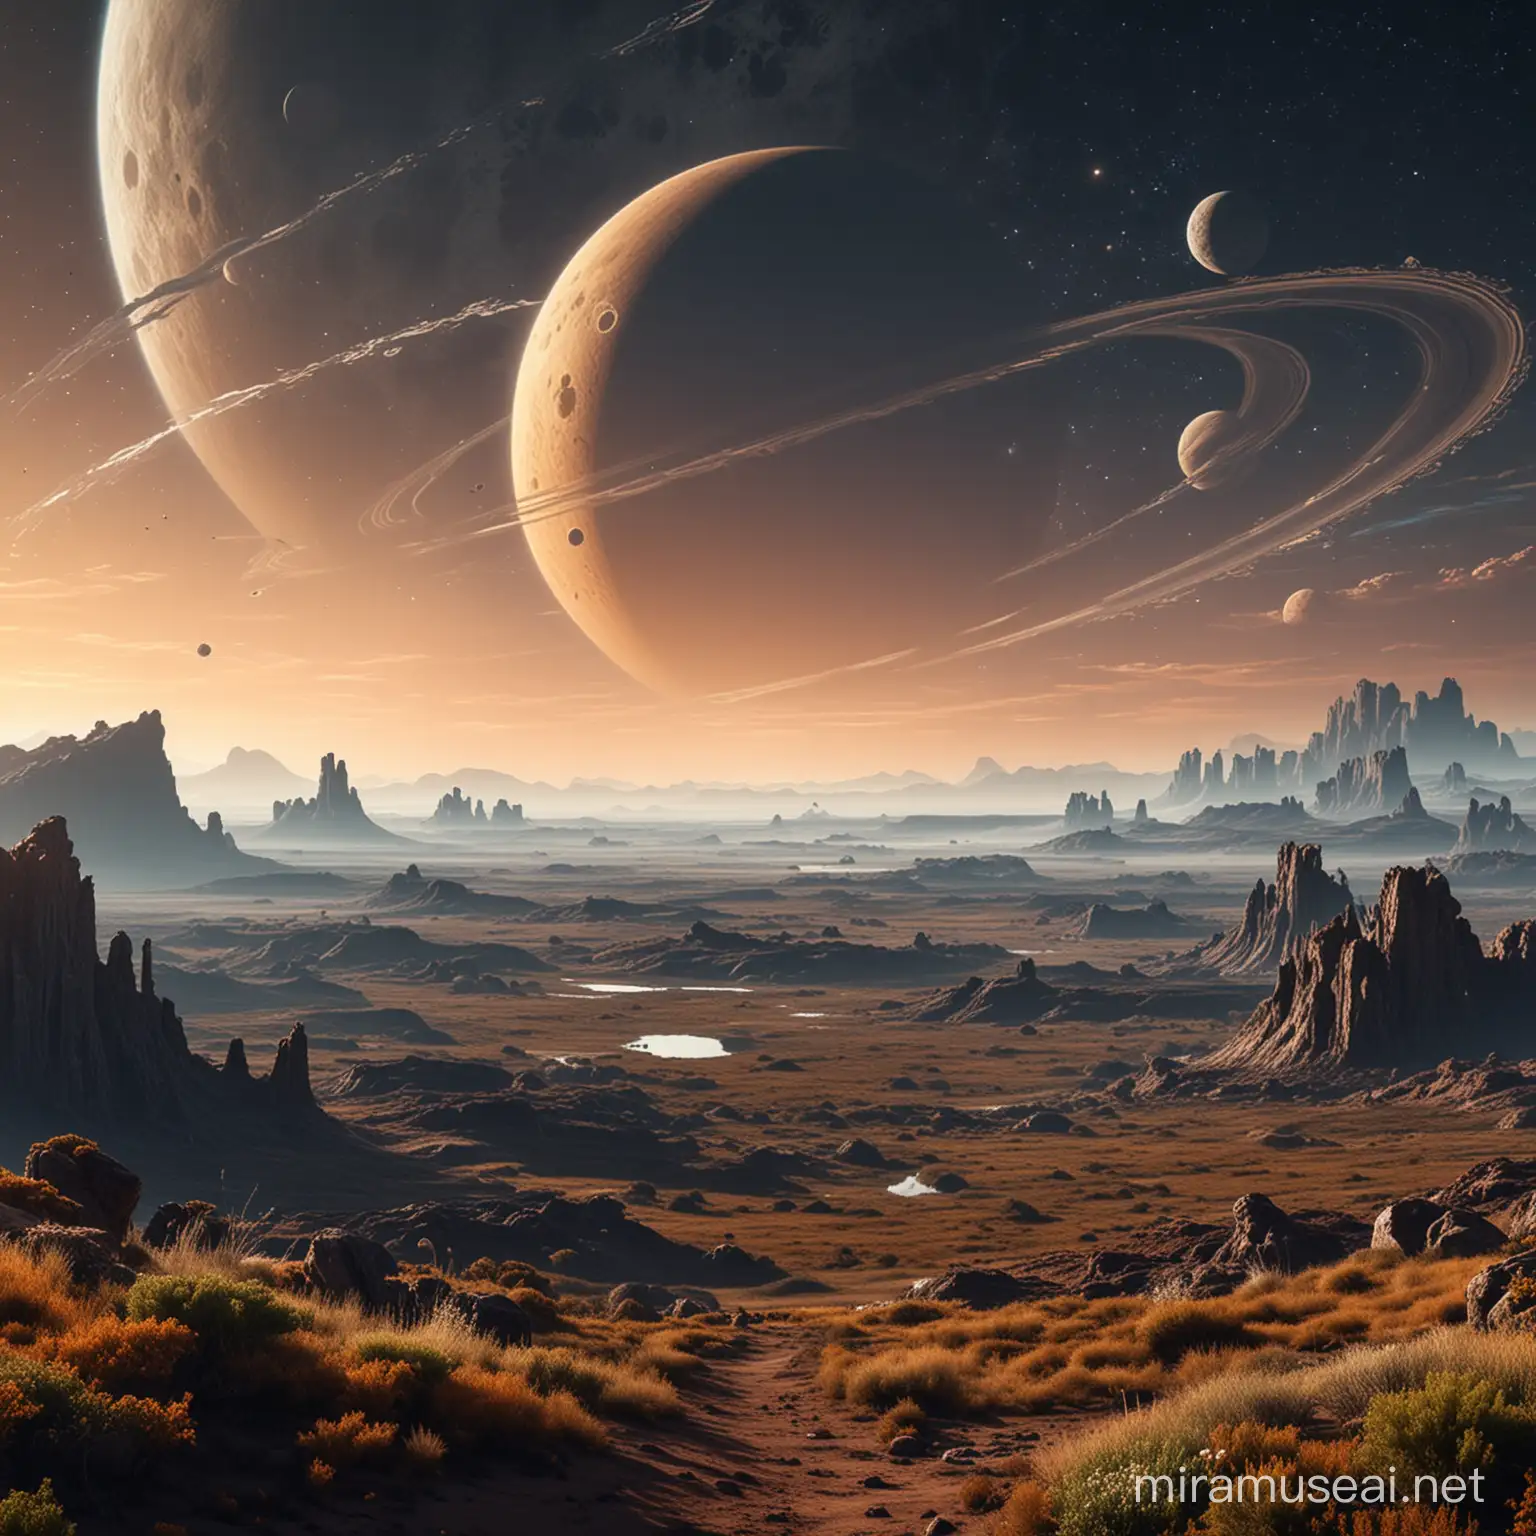 Exotic Extraterrestrial Landscape with Saturnlike Planet and Moon